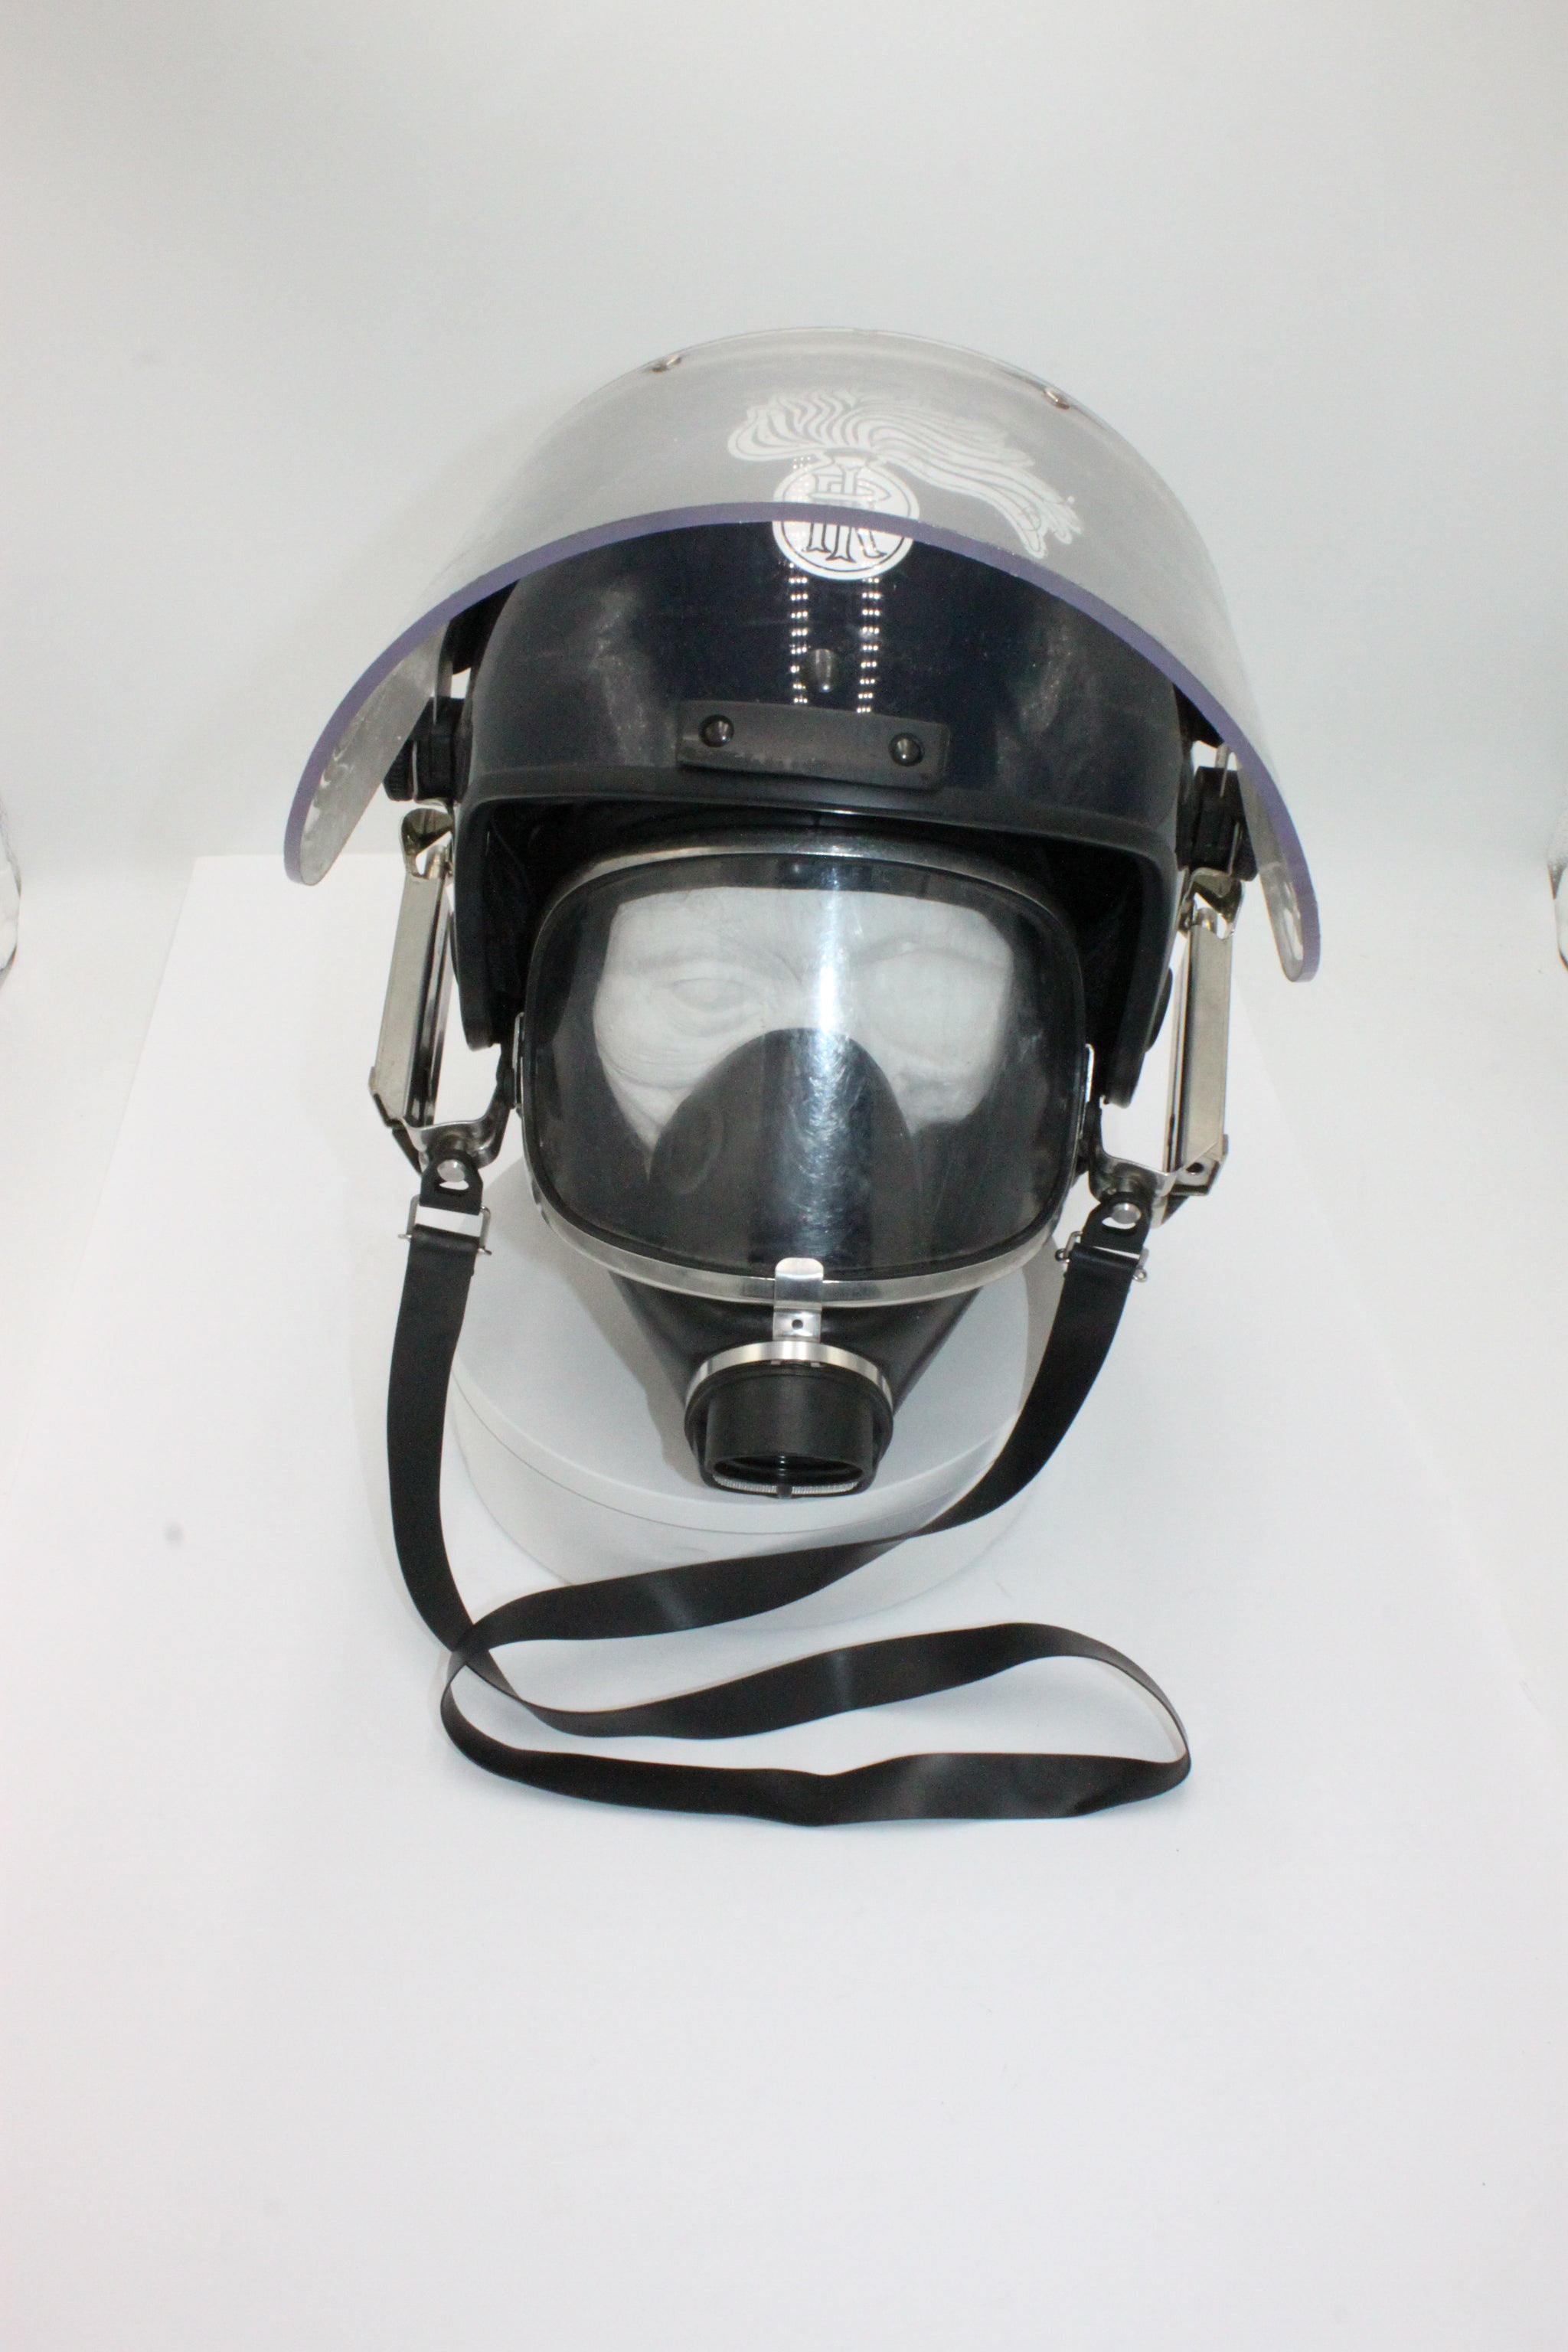 Italian/German Police Military Drager Gas Mask Nova S with Police Riot Helmet